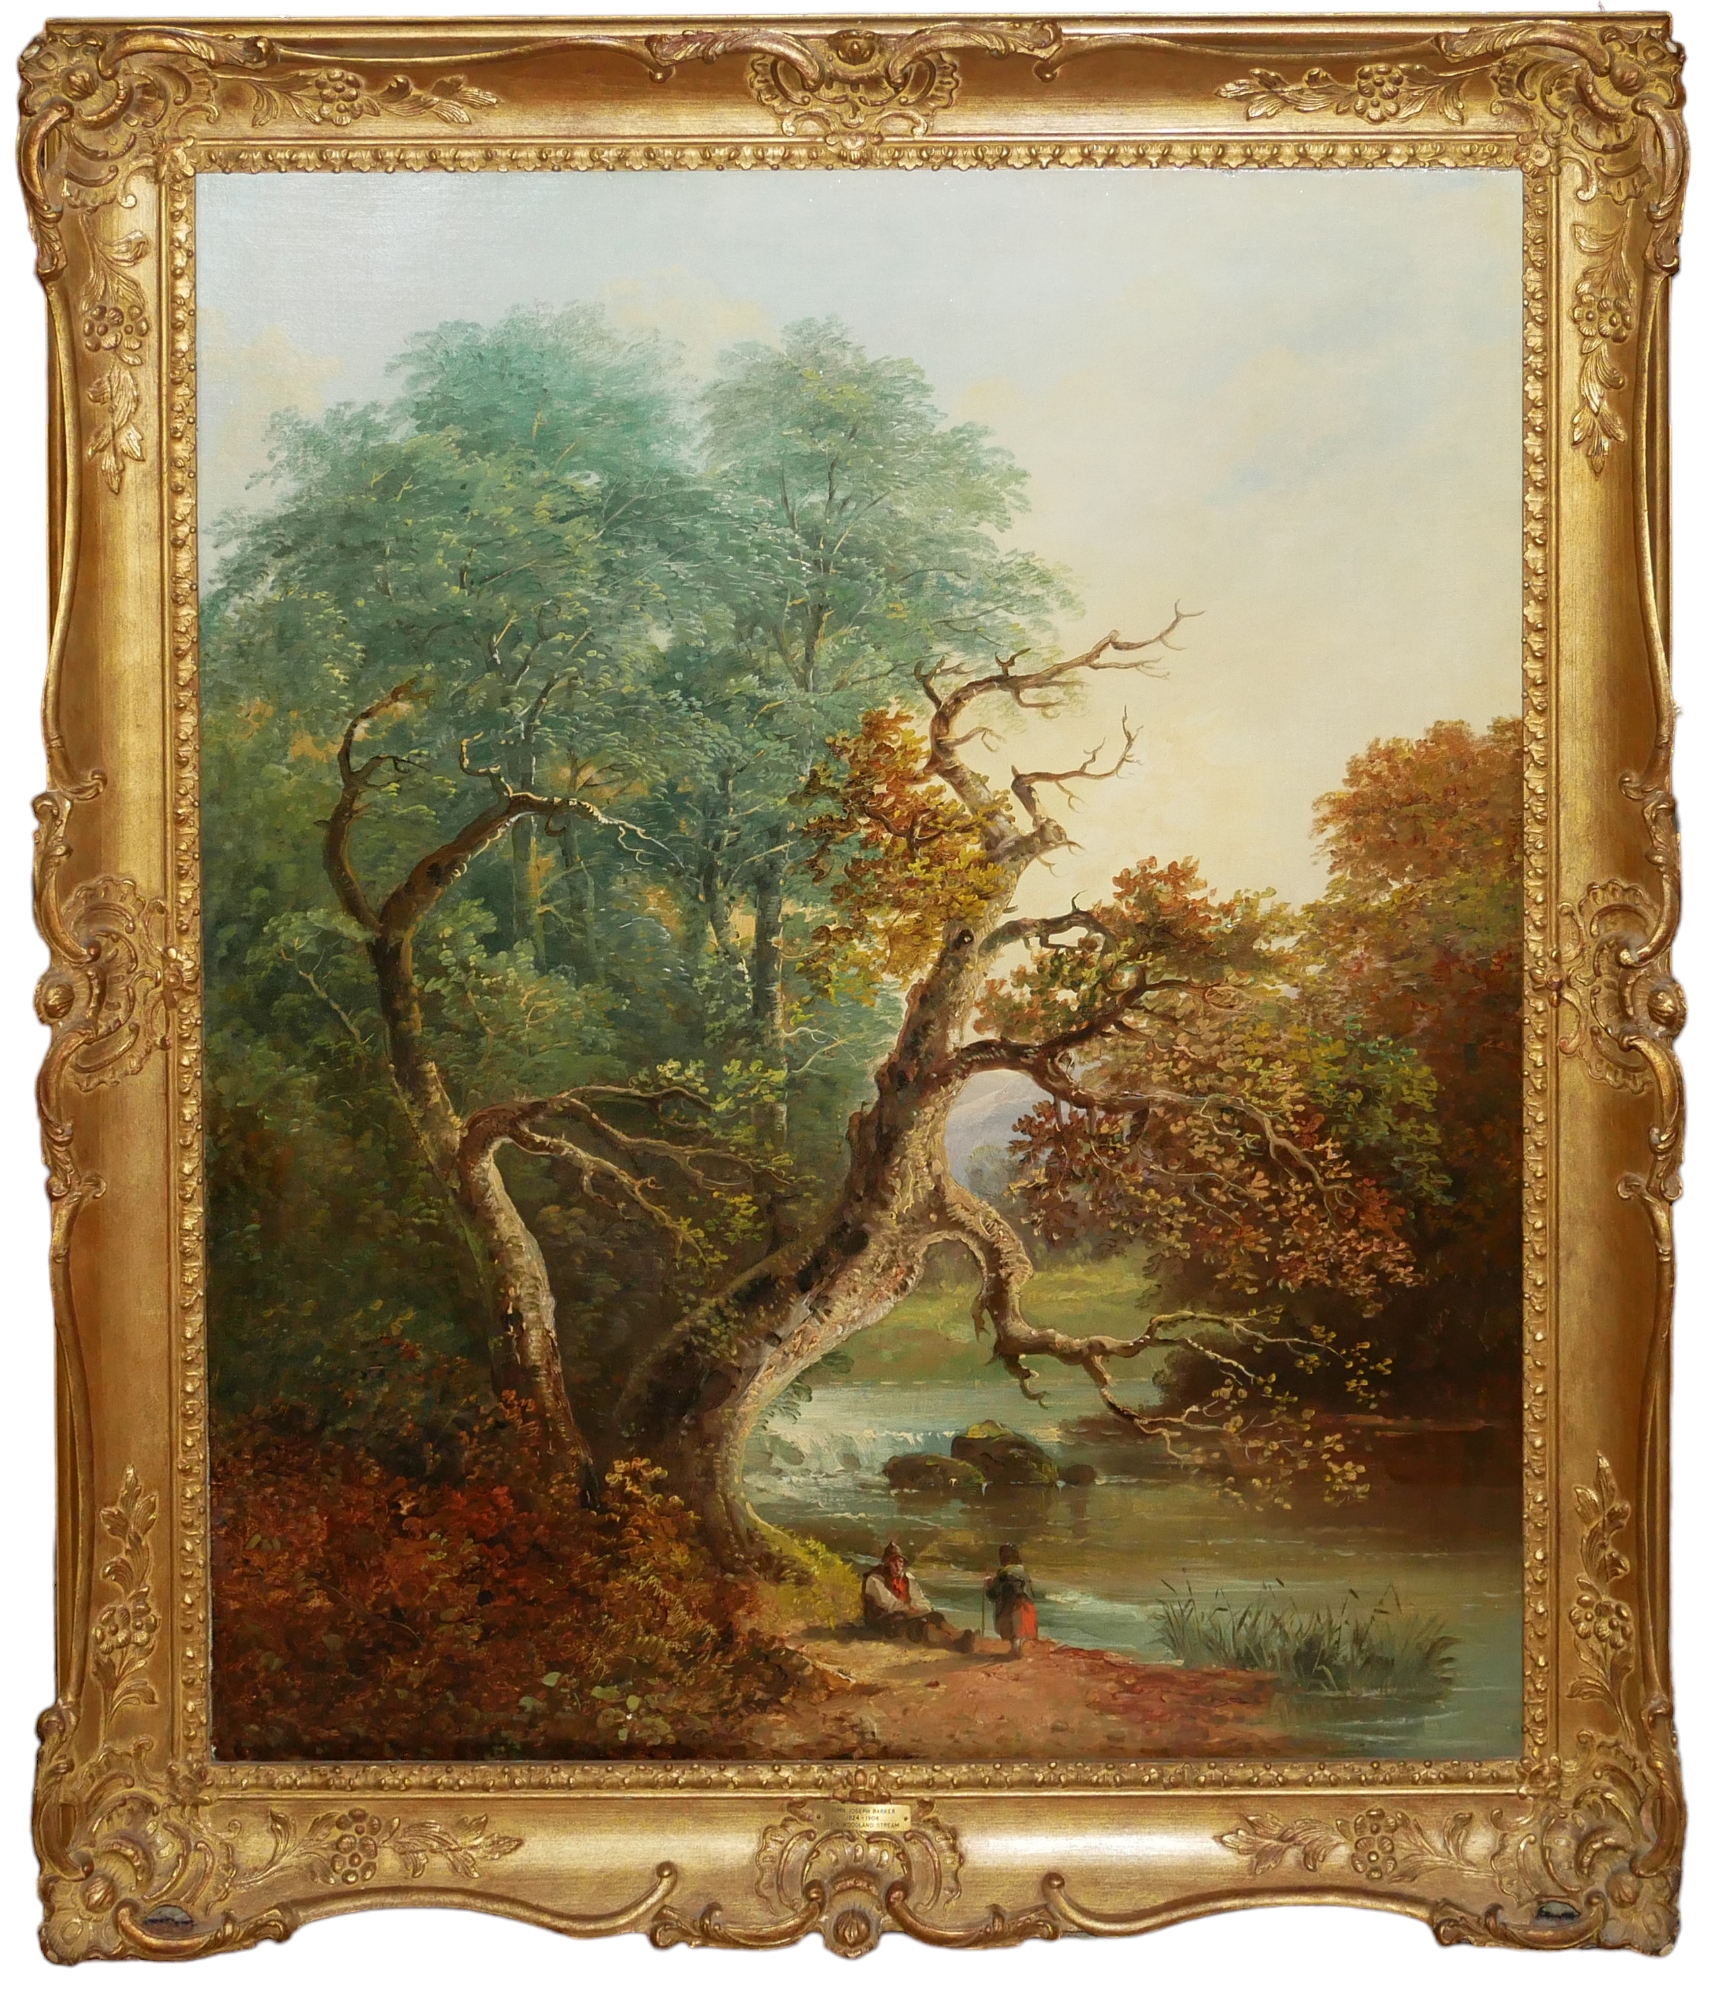 JOHN JOSEPH BARKER, 1824 - 1904, OIL ON CANVAS Landscape, titled 'By a Woodland Stream', two figures - Image 2 of 7